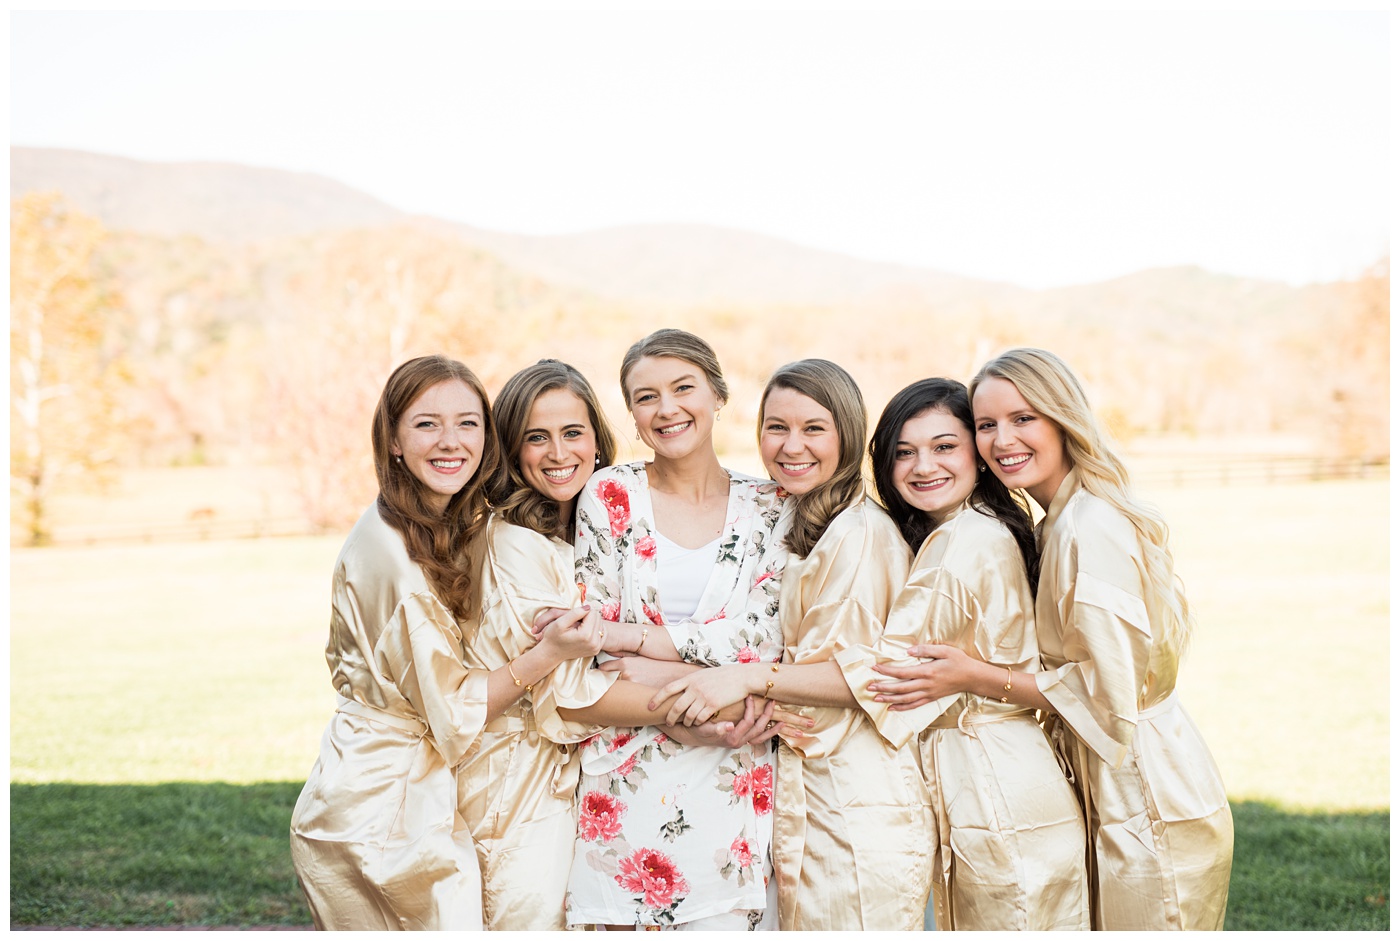 Bridesmaids getting ready for their wedding in Charlottesville VA